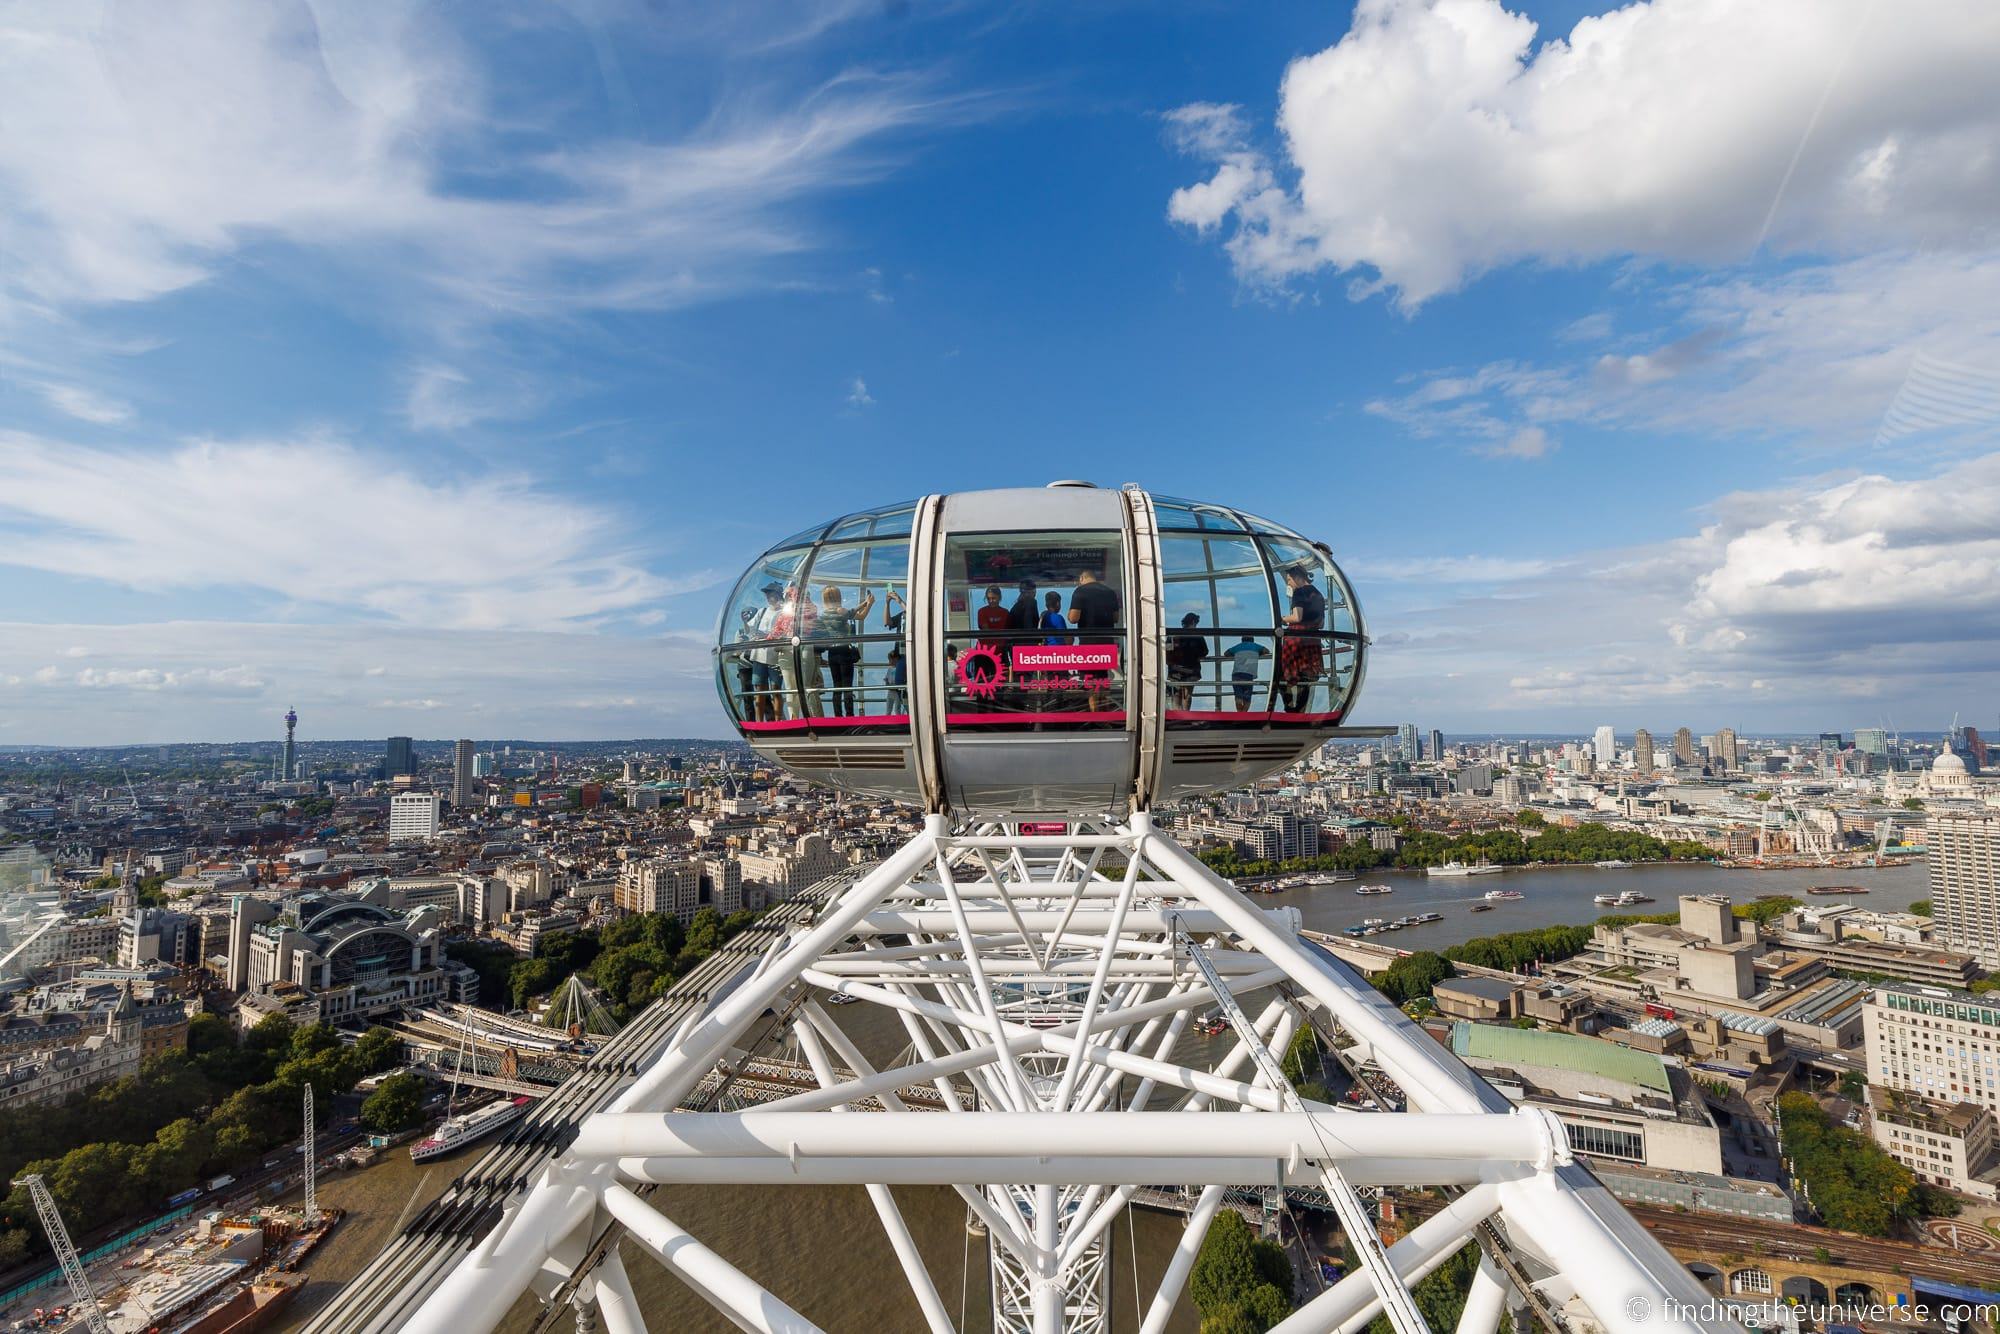 Top of the London Eye view